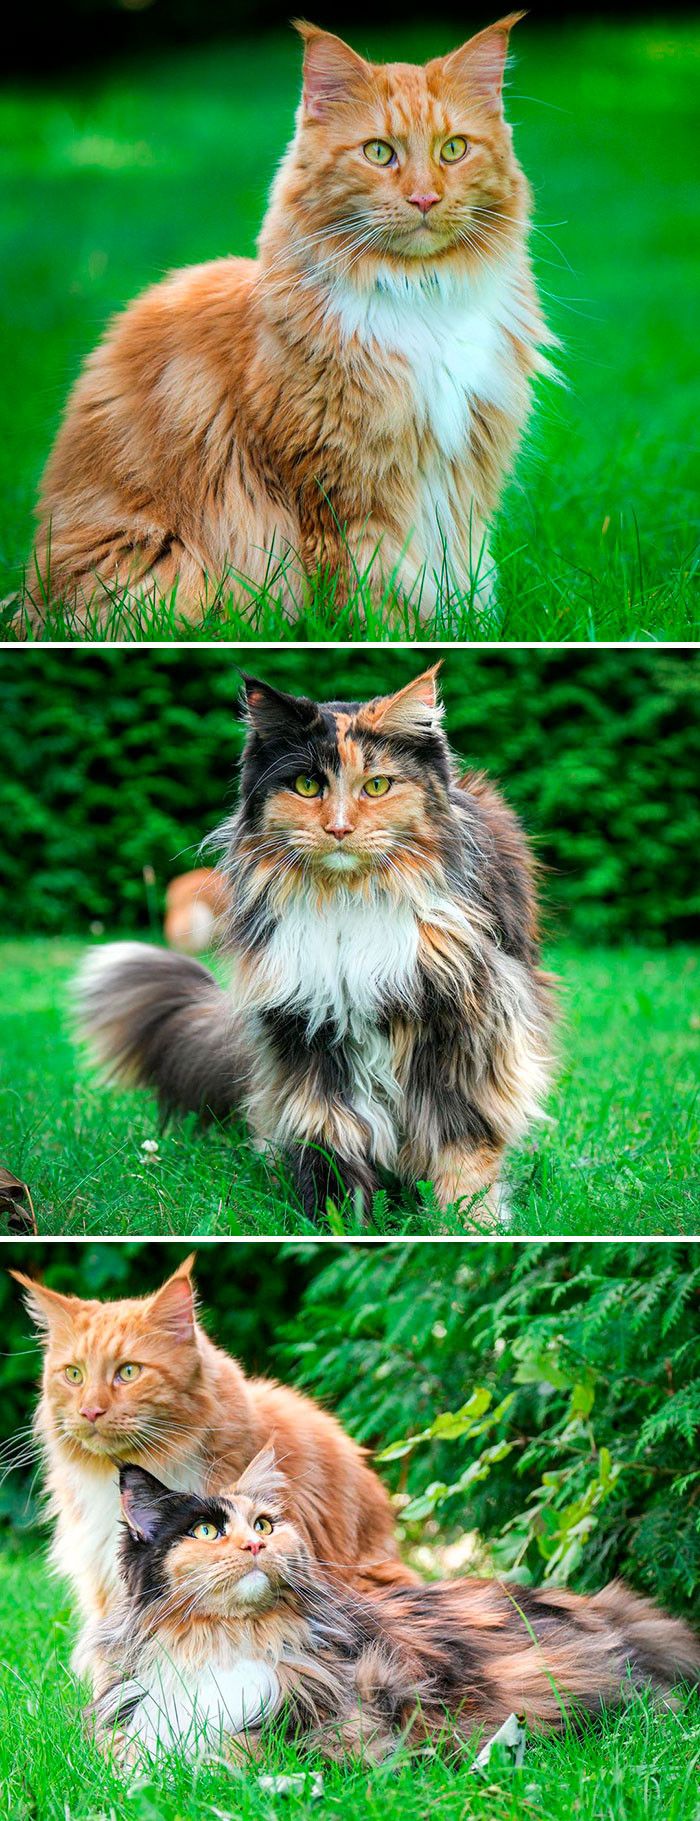 Maine Coon Cats come in all shapes, sizes and colors as well!